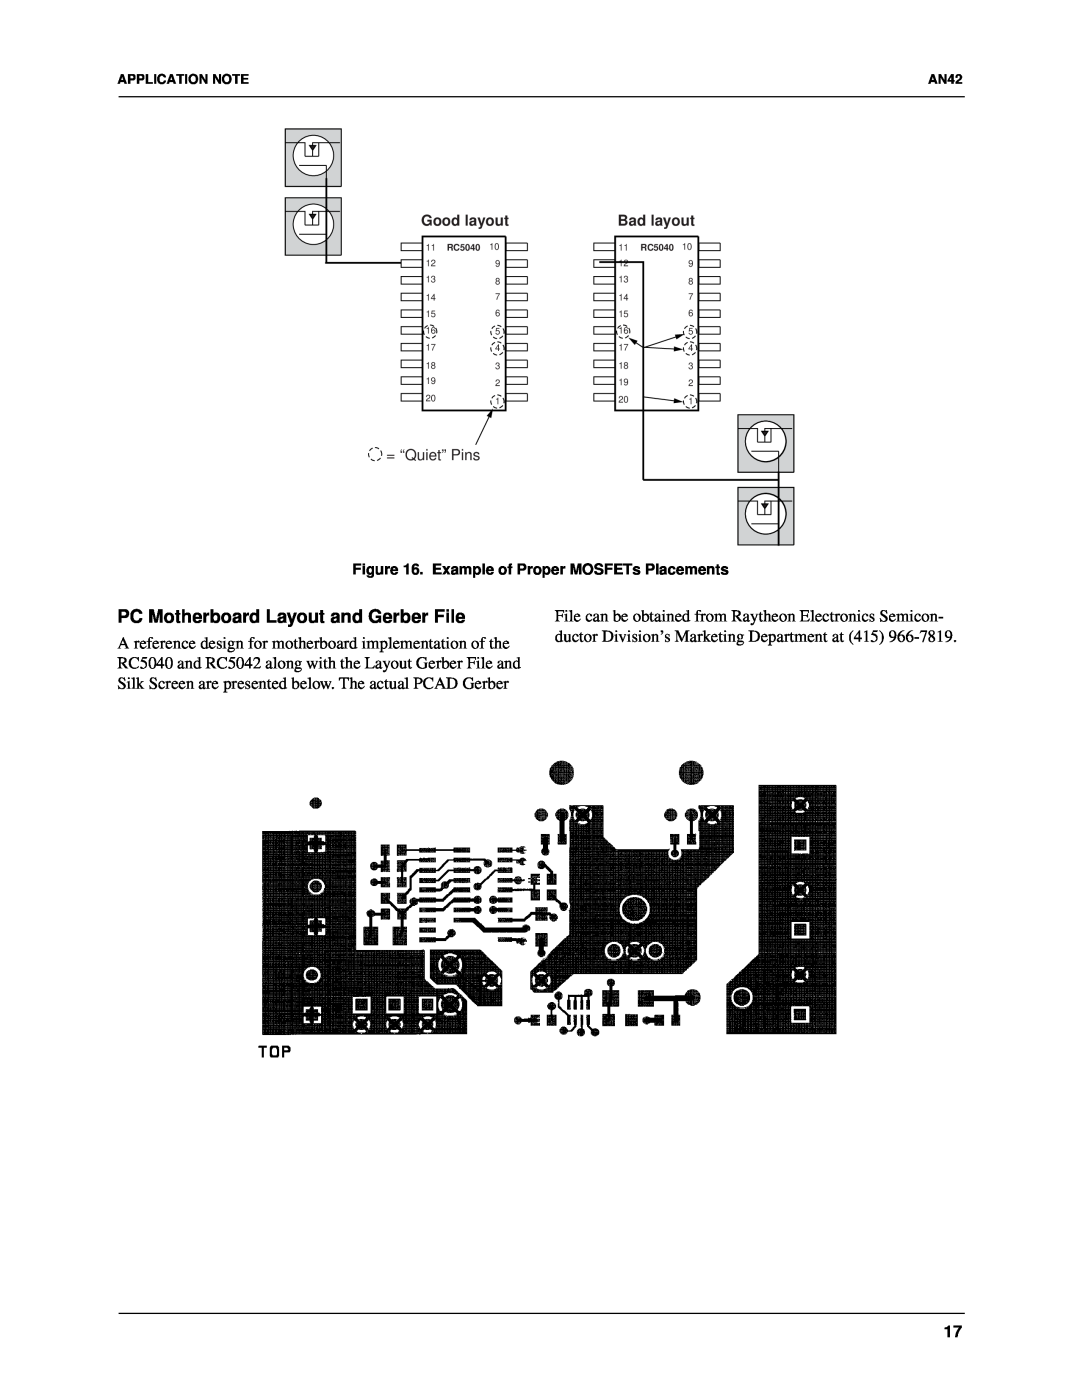 Fairchild RC5040, RC5042 specifications PC Motherboard Layout and Gerber File, = “Quiet” Pins 